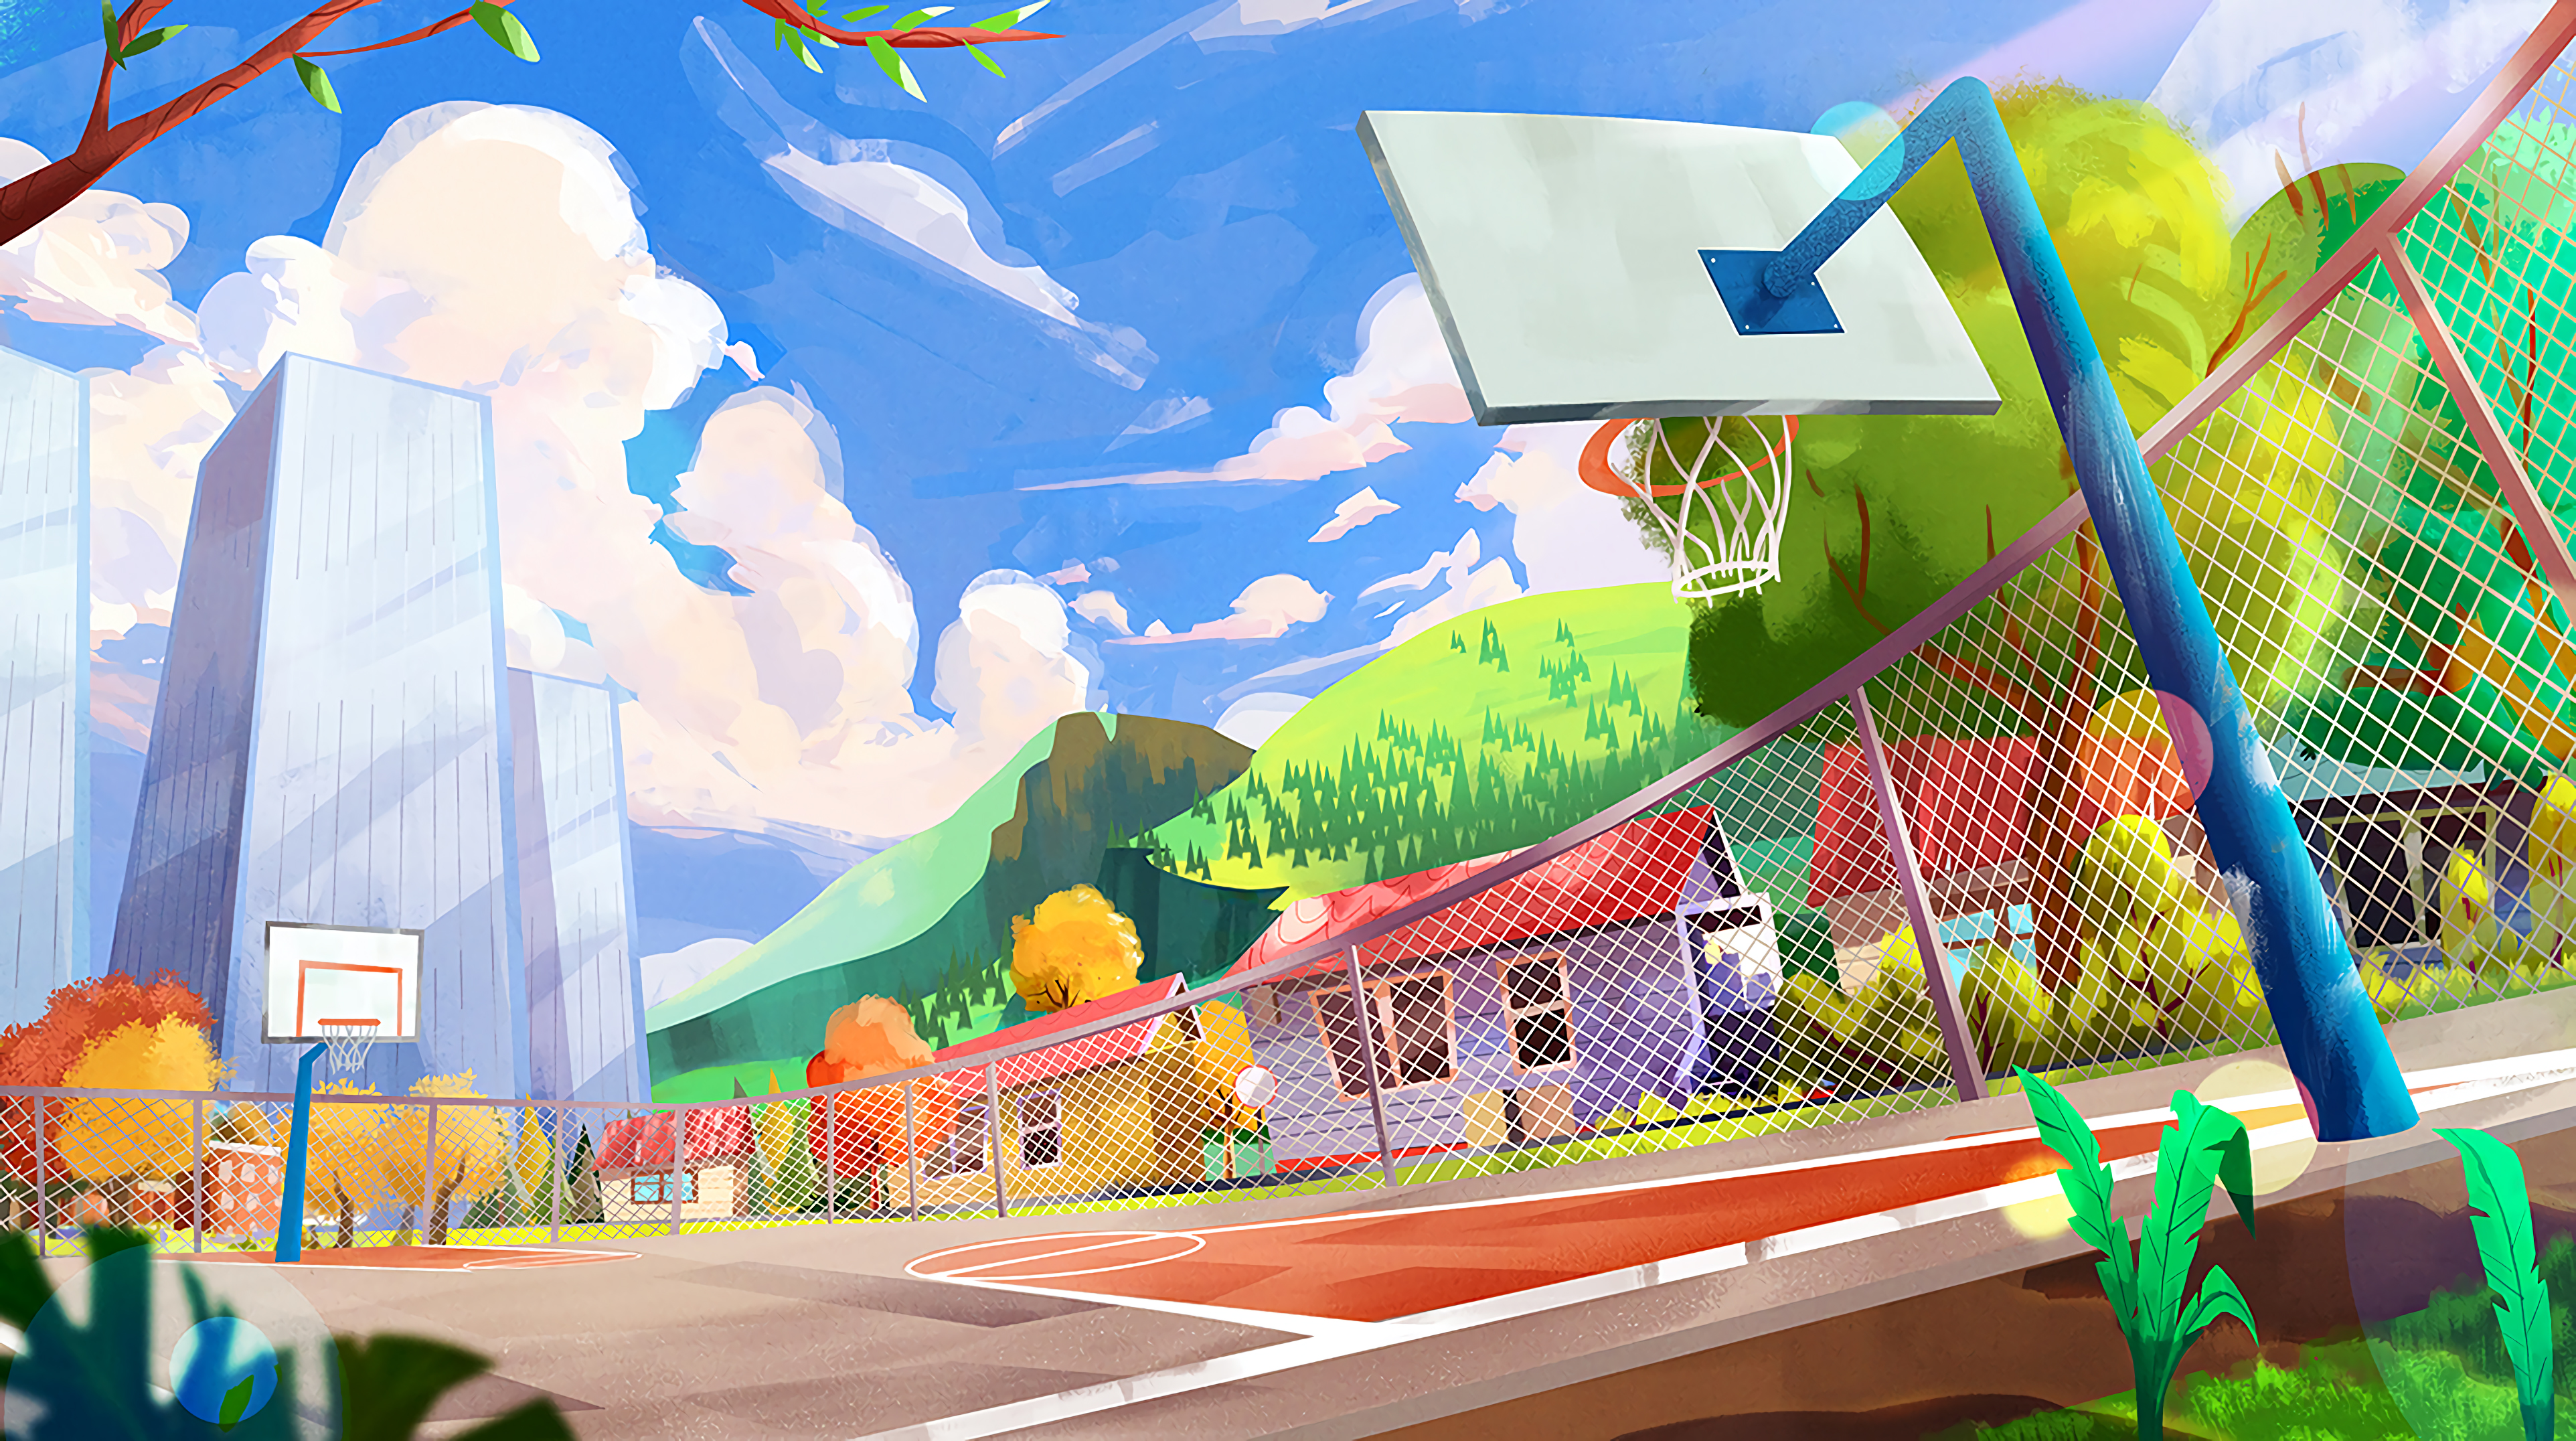 desktop Images basketball hoop, playground, city, colorful, art, colourful, basketball ring, sports ground